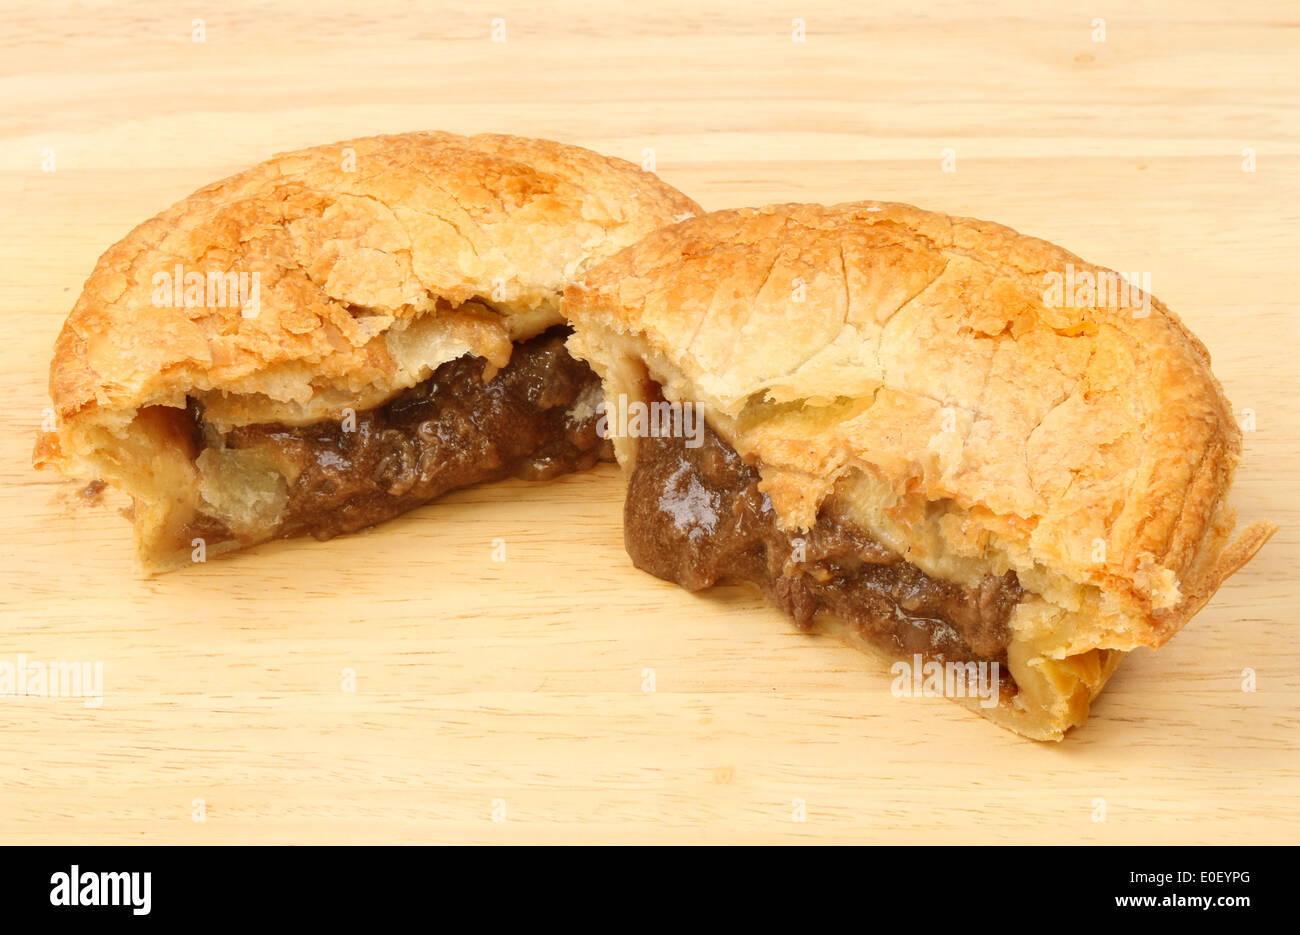 Cooked meat pie cut in half on a wooden board Stock Photo